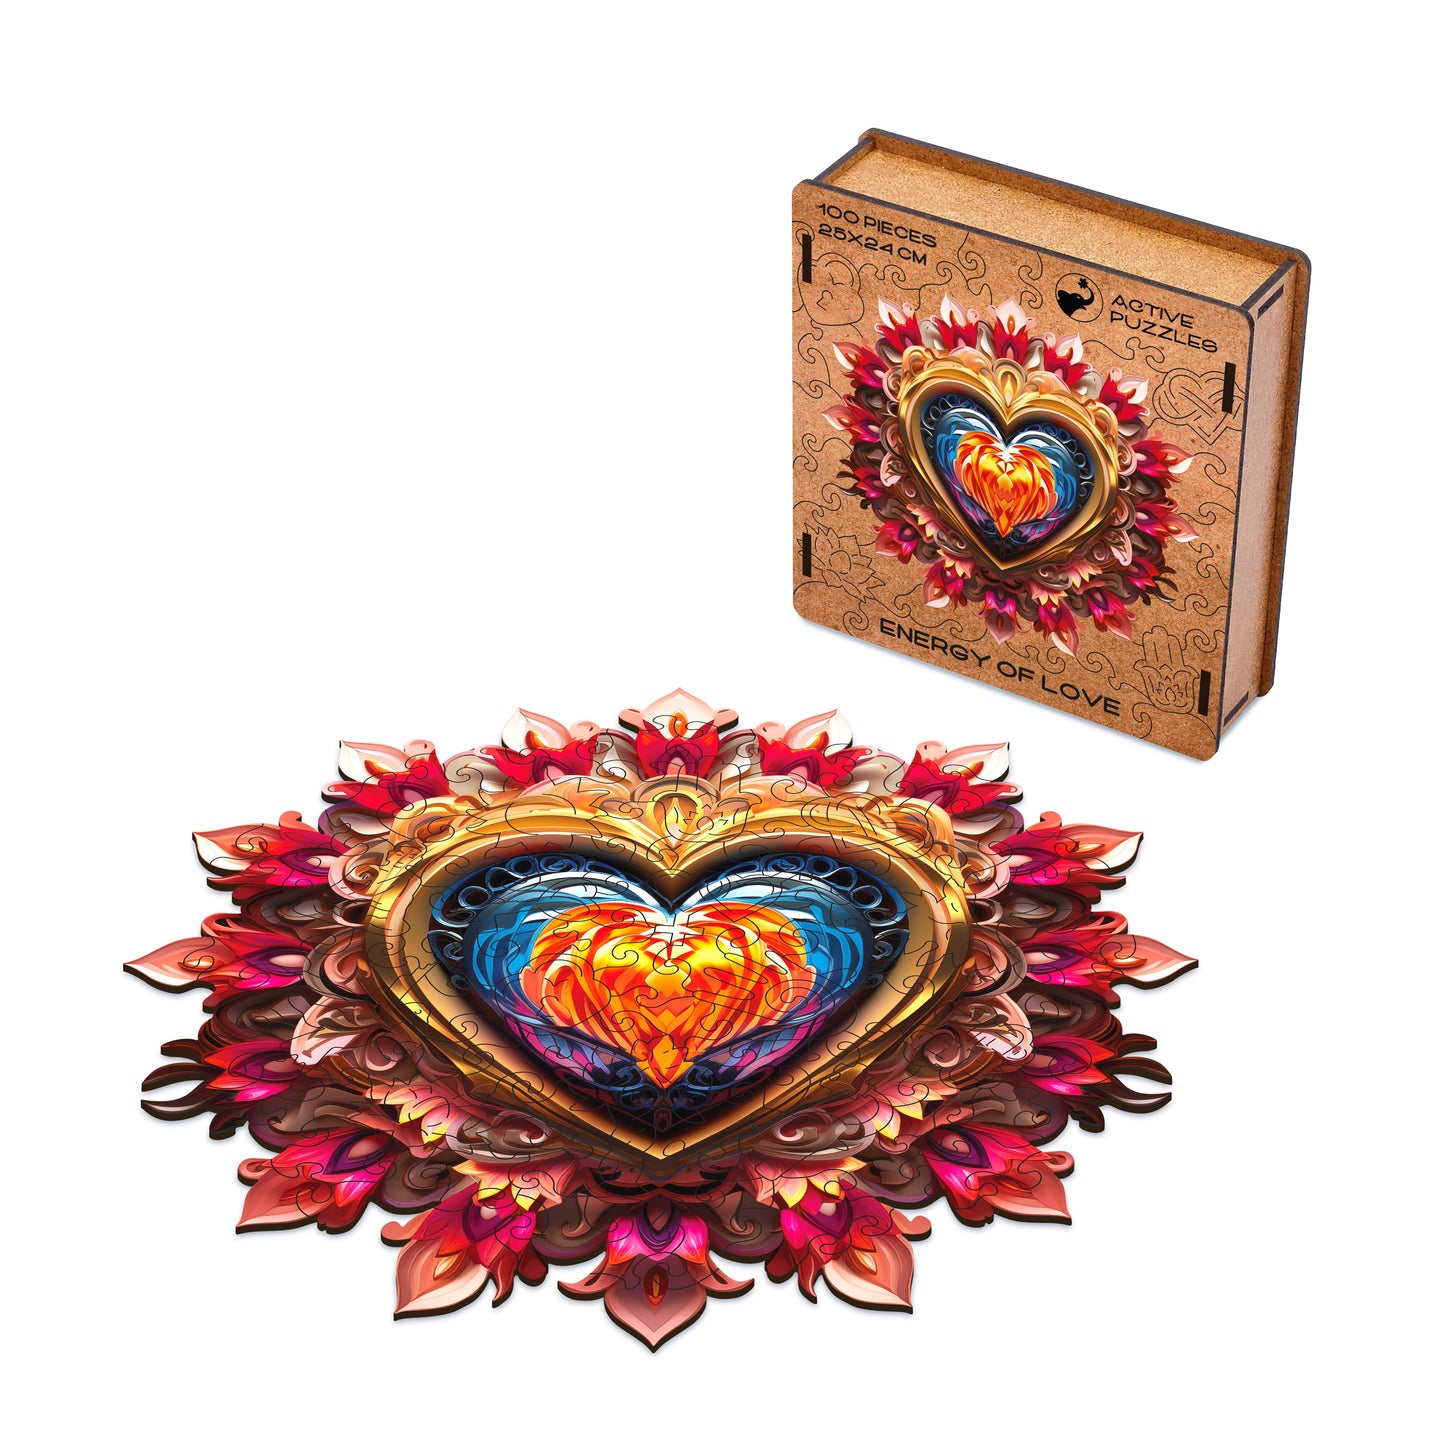 Energy of Love Mandala Wooden Puzzle Active Puzzles